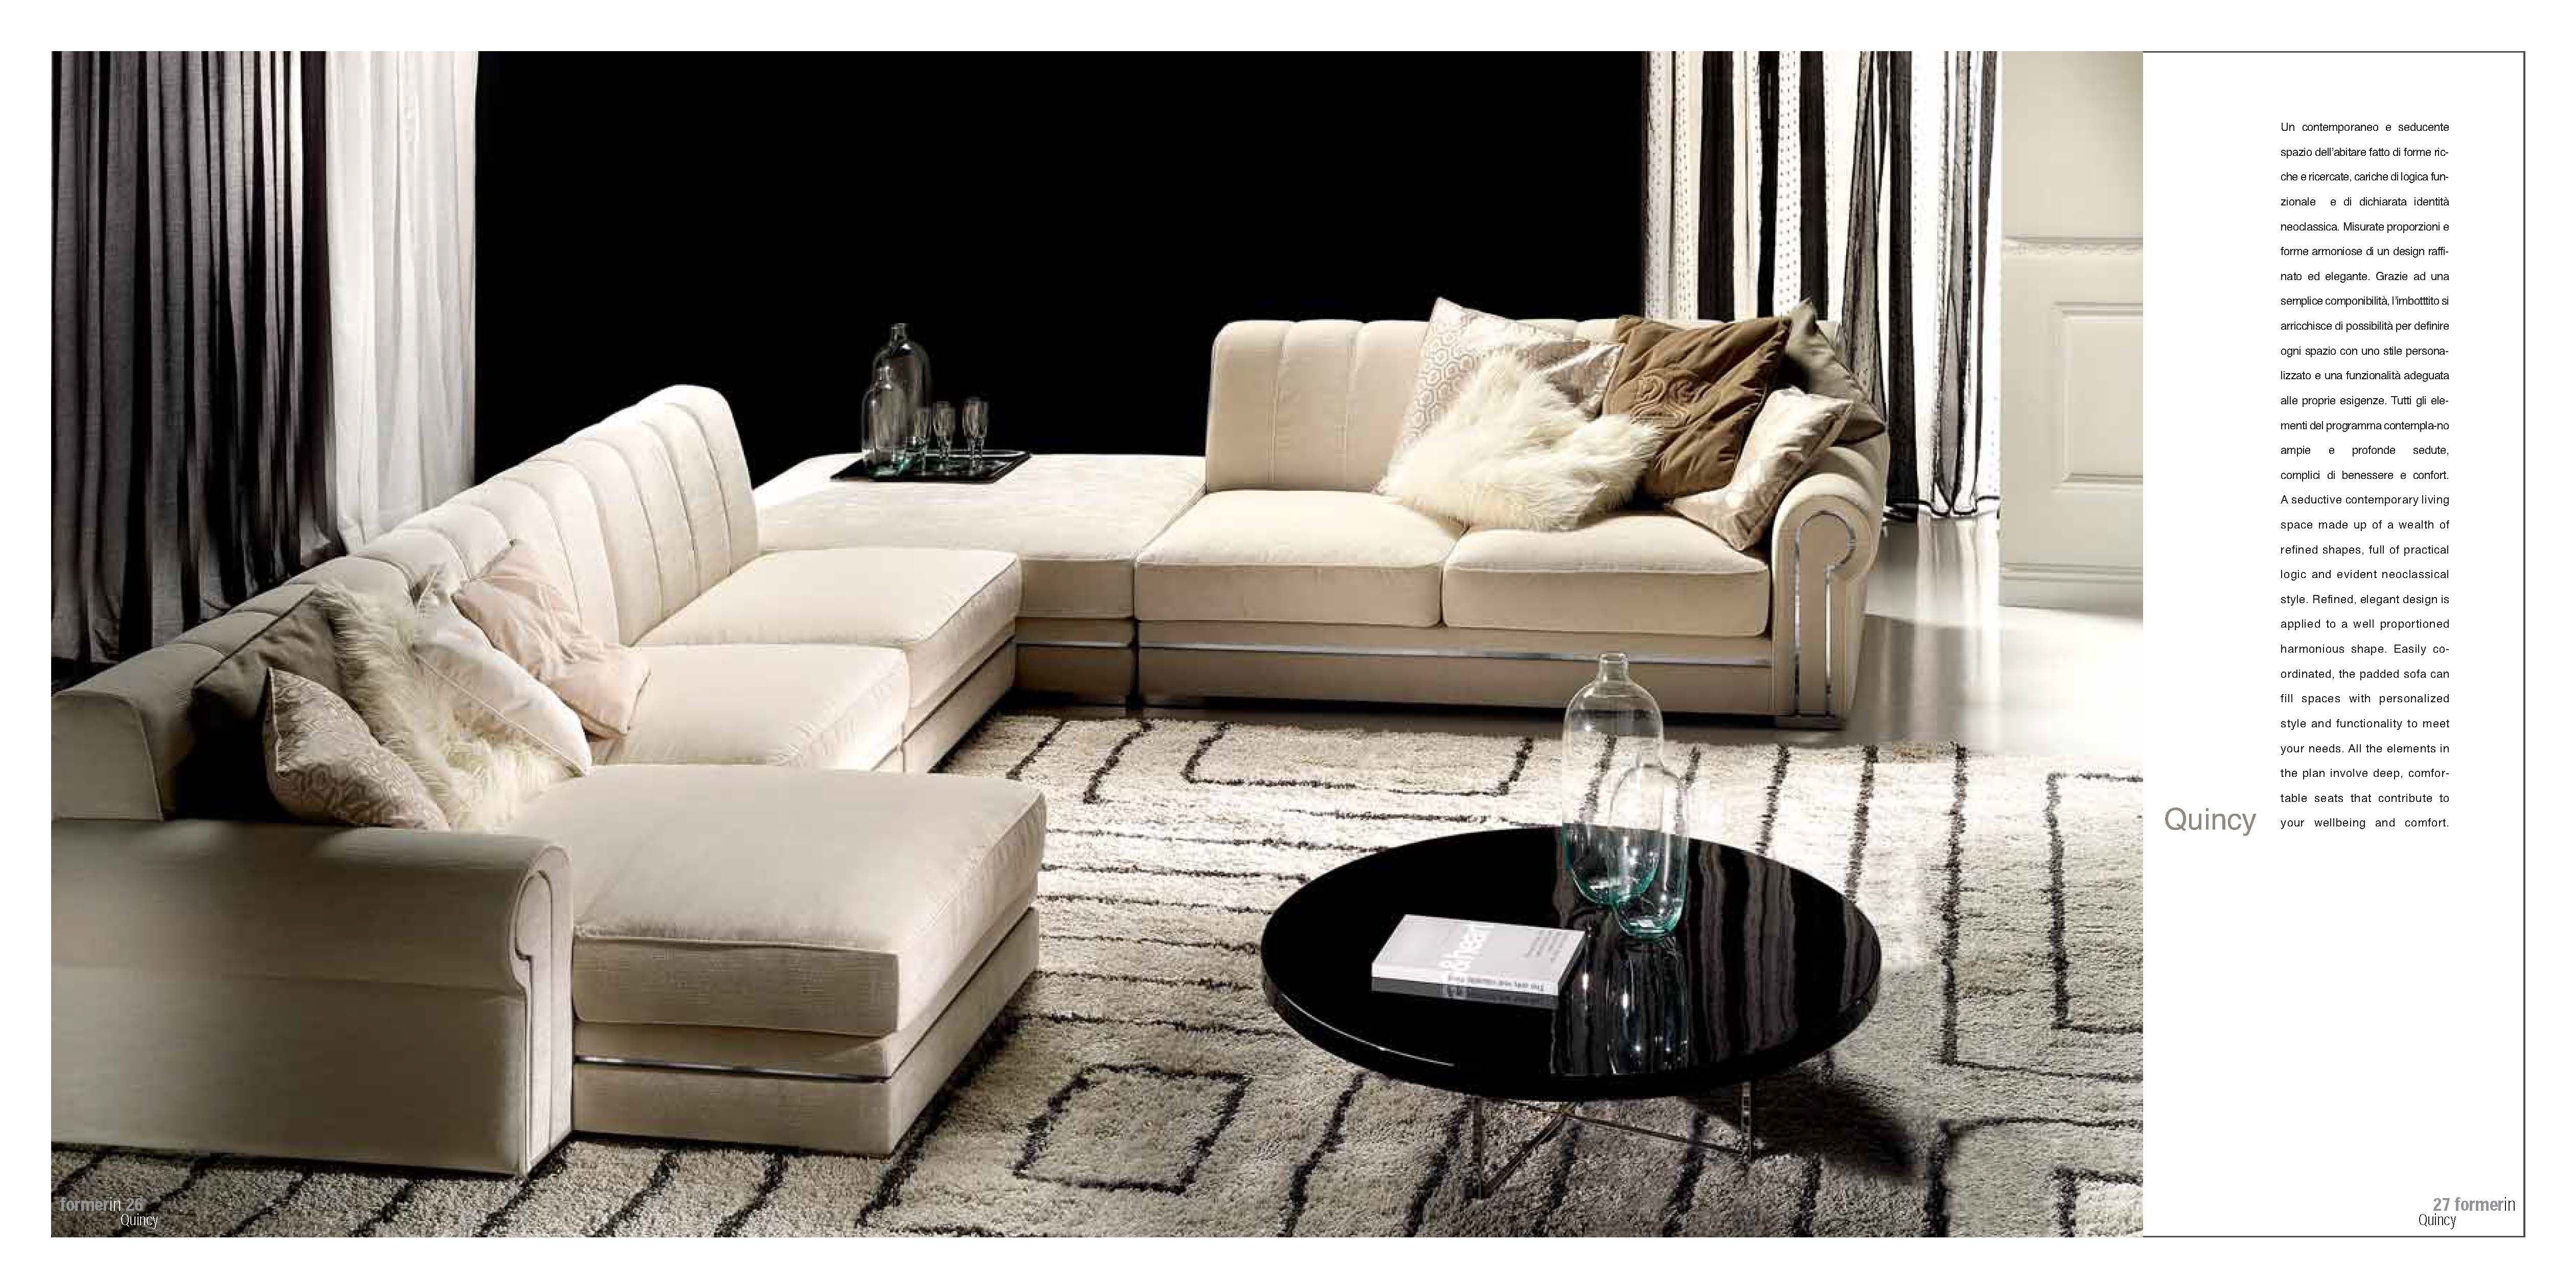 Living Room Furniture Sleepers Sofas Loveseats and Chairs Quincey